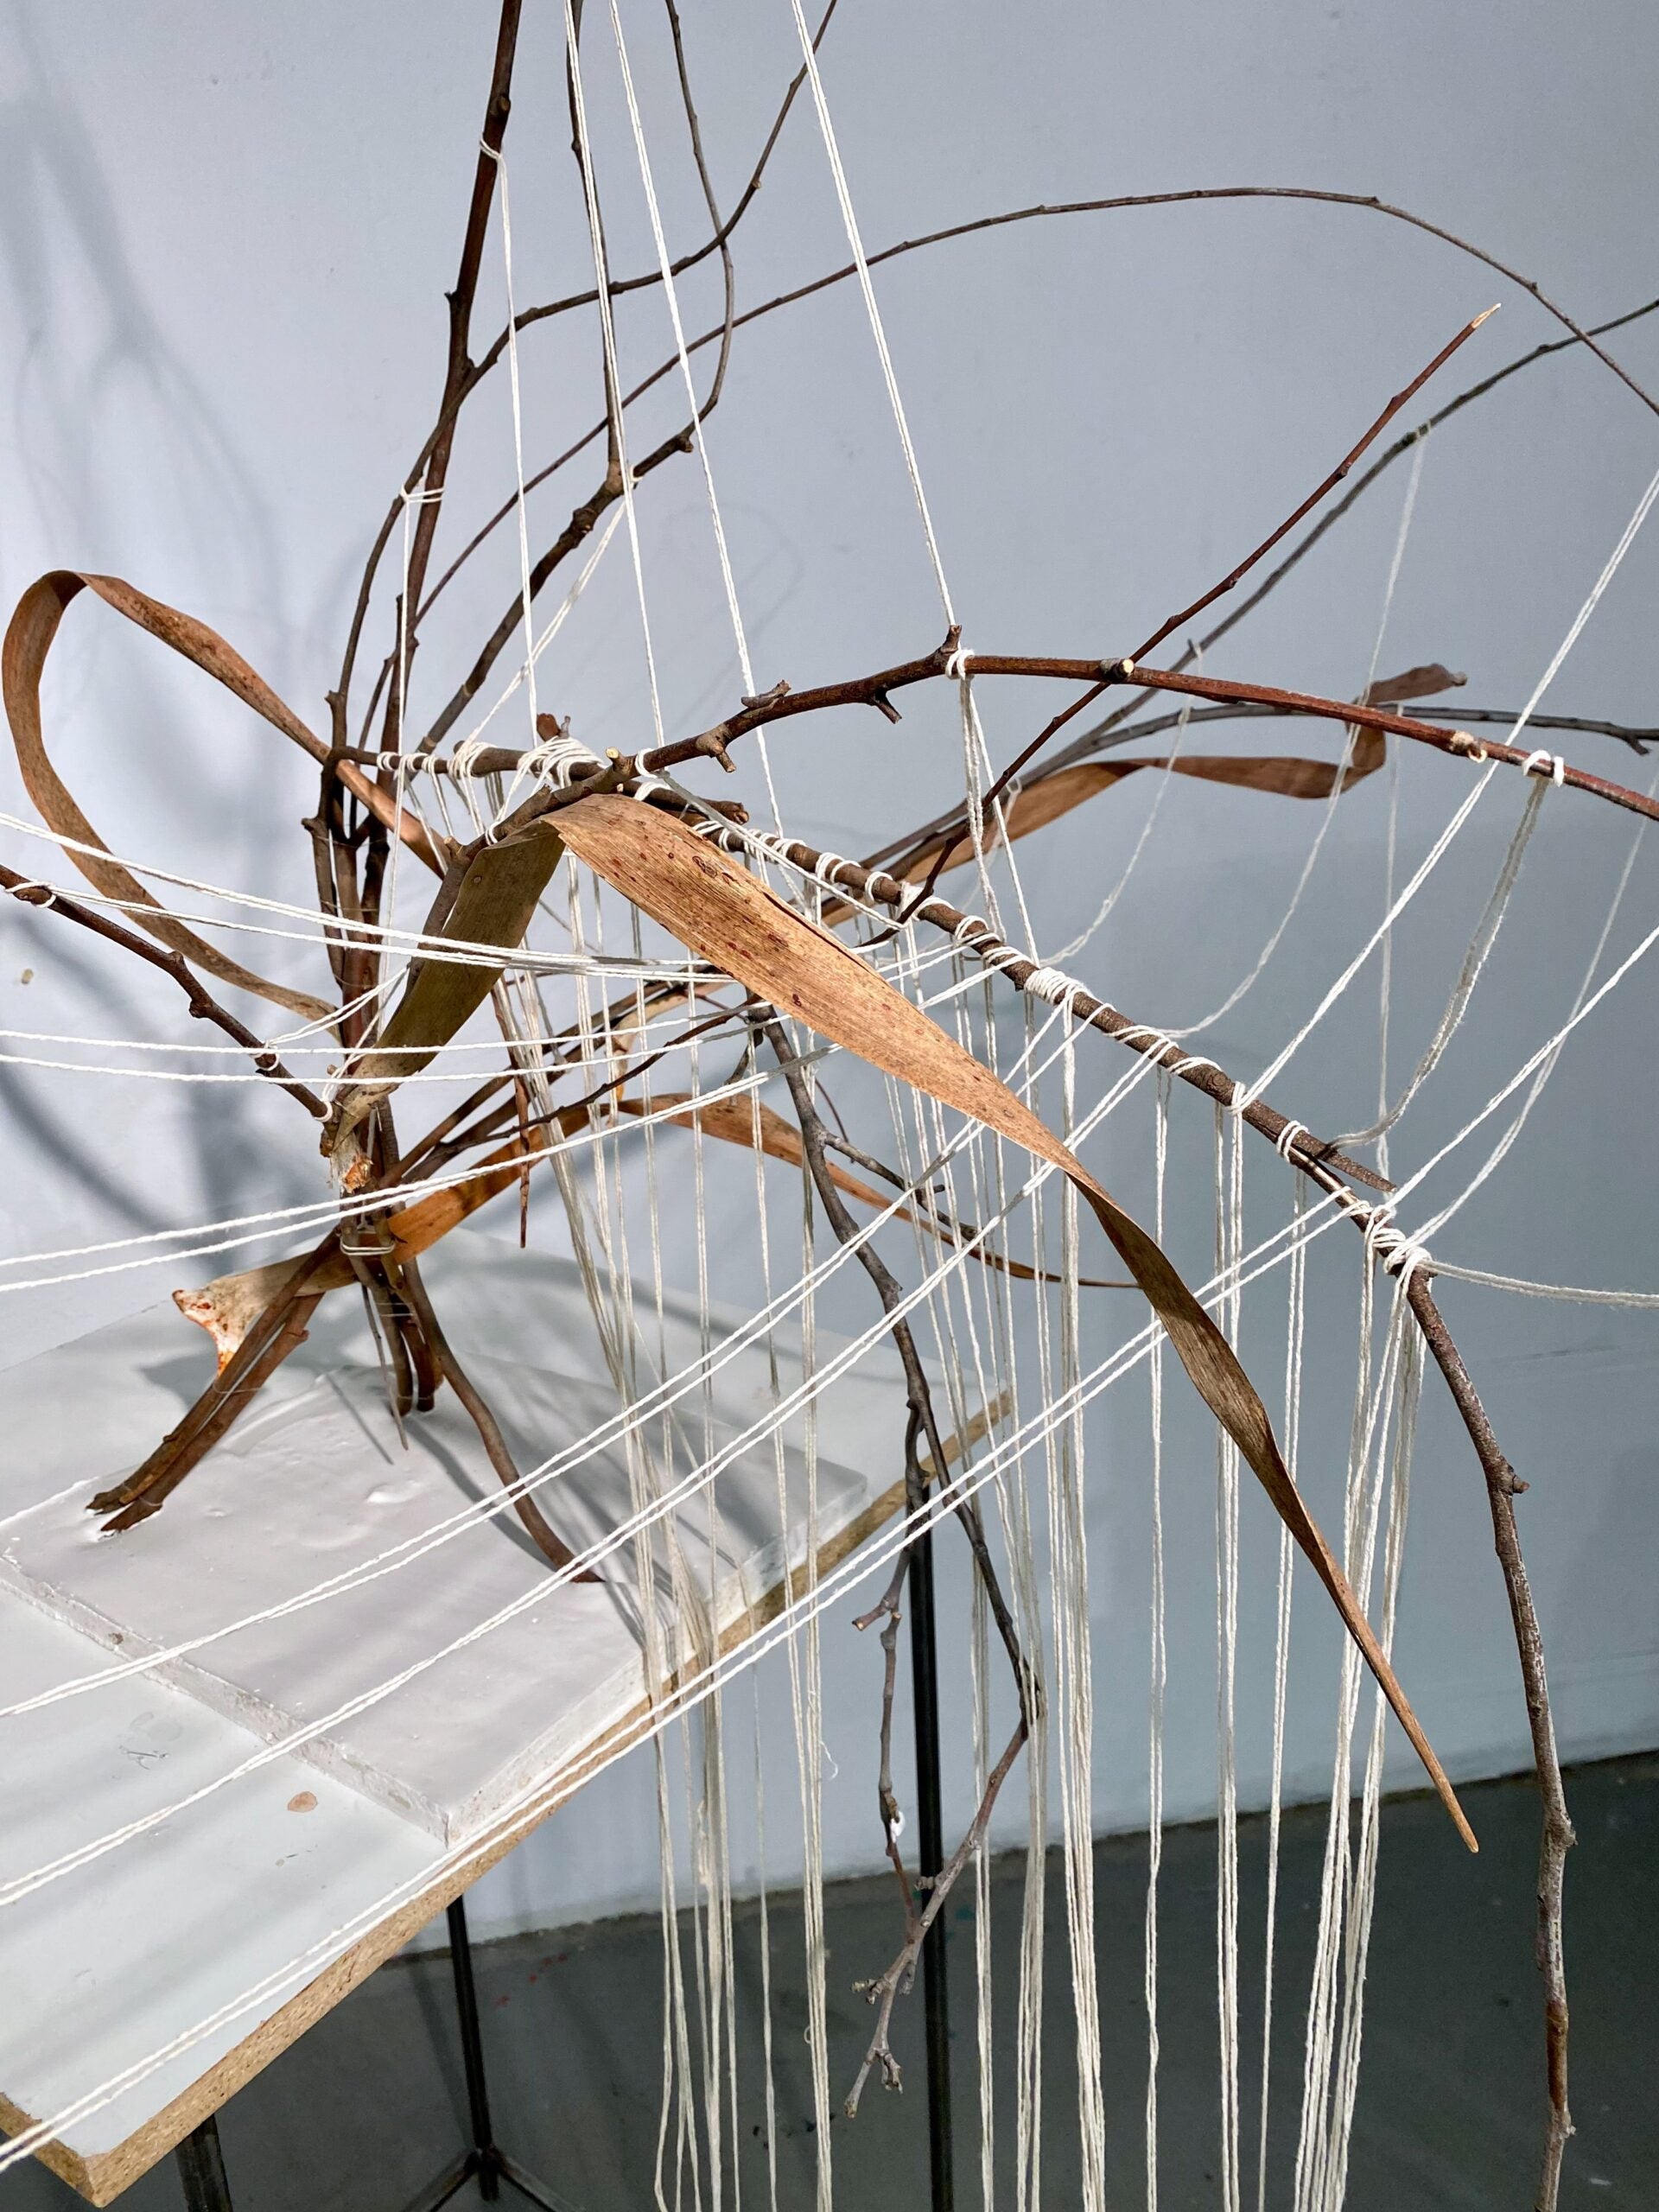 Dried branches and leaves are bent, connected, and bound by twine. The twine wraps around and hangs from the branches.